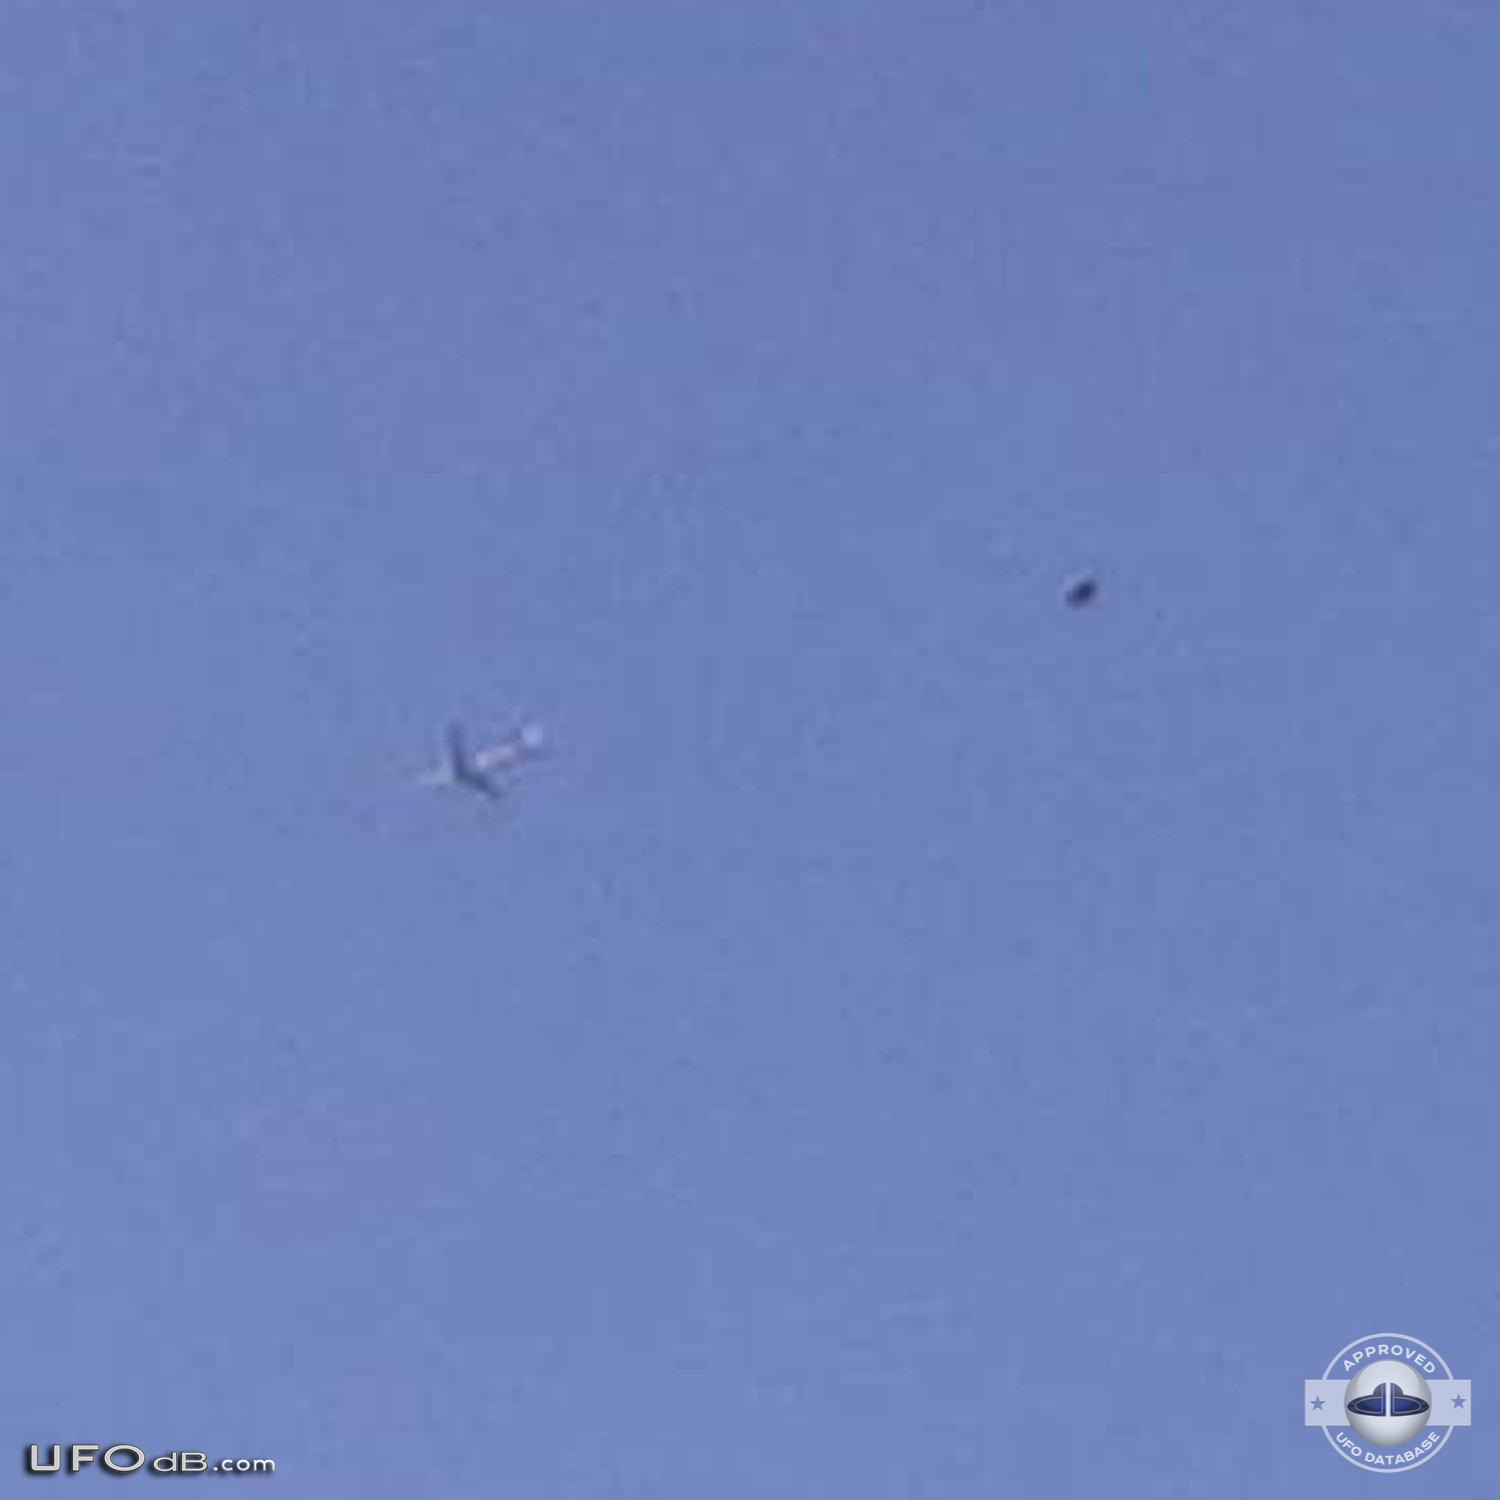 Newyorker with 170 ufo sightings gives us ufo pictures to prove it UFO Picture #401-2